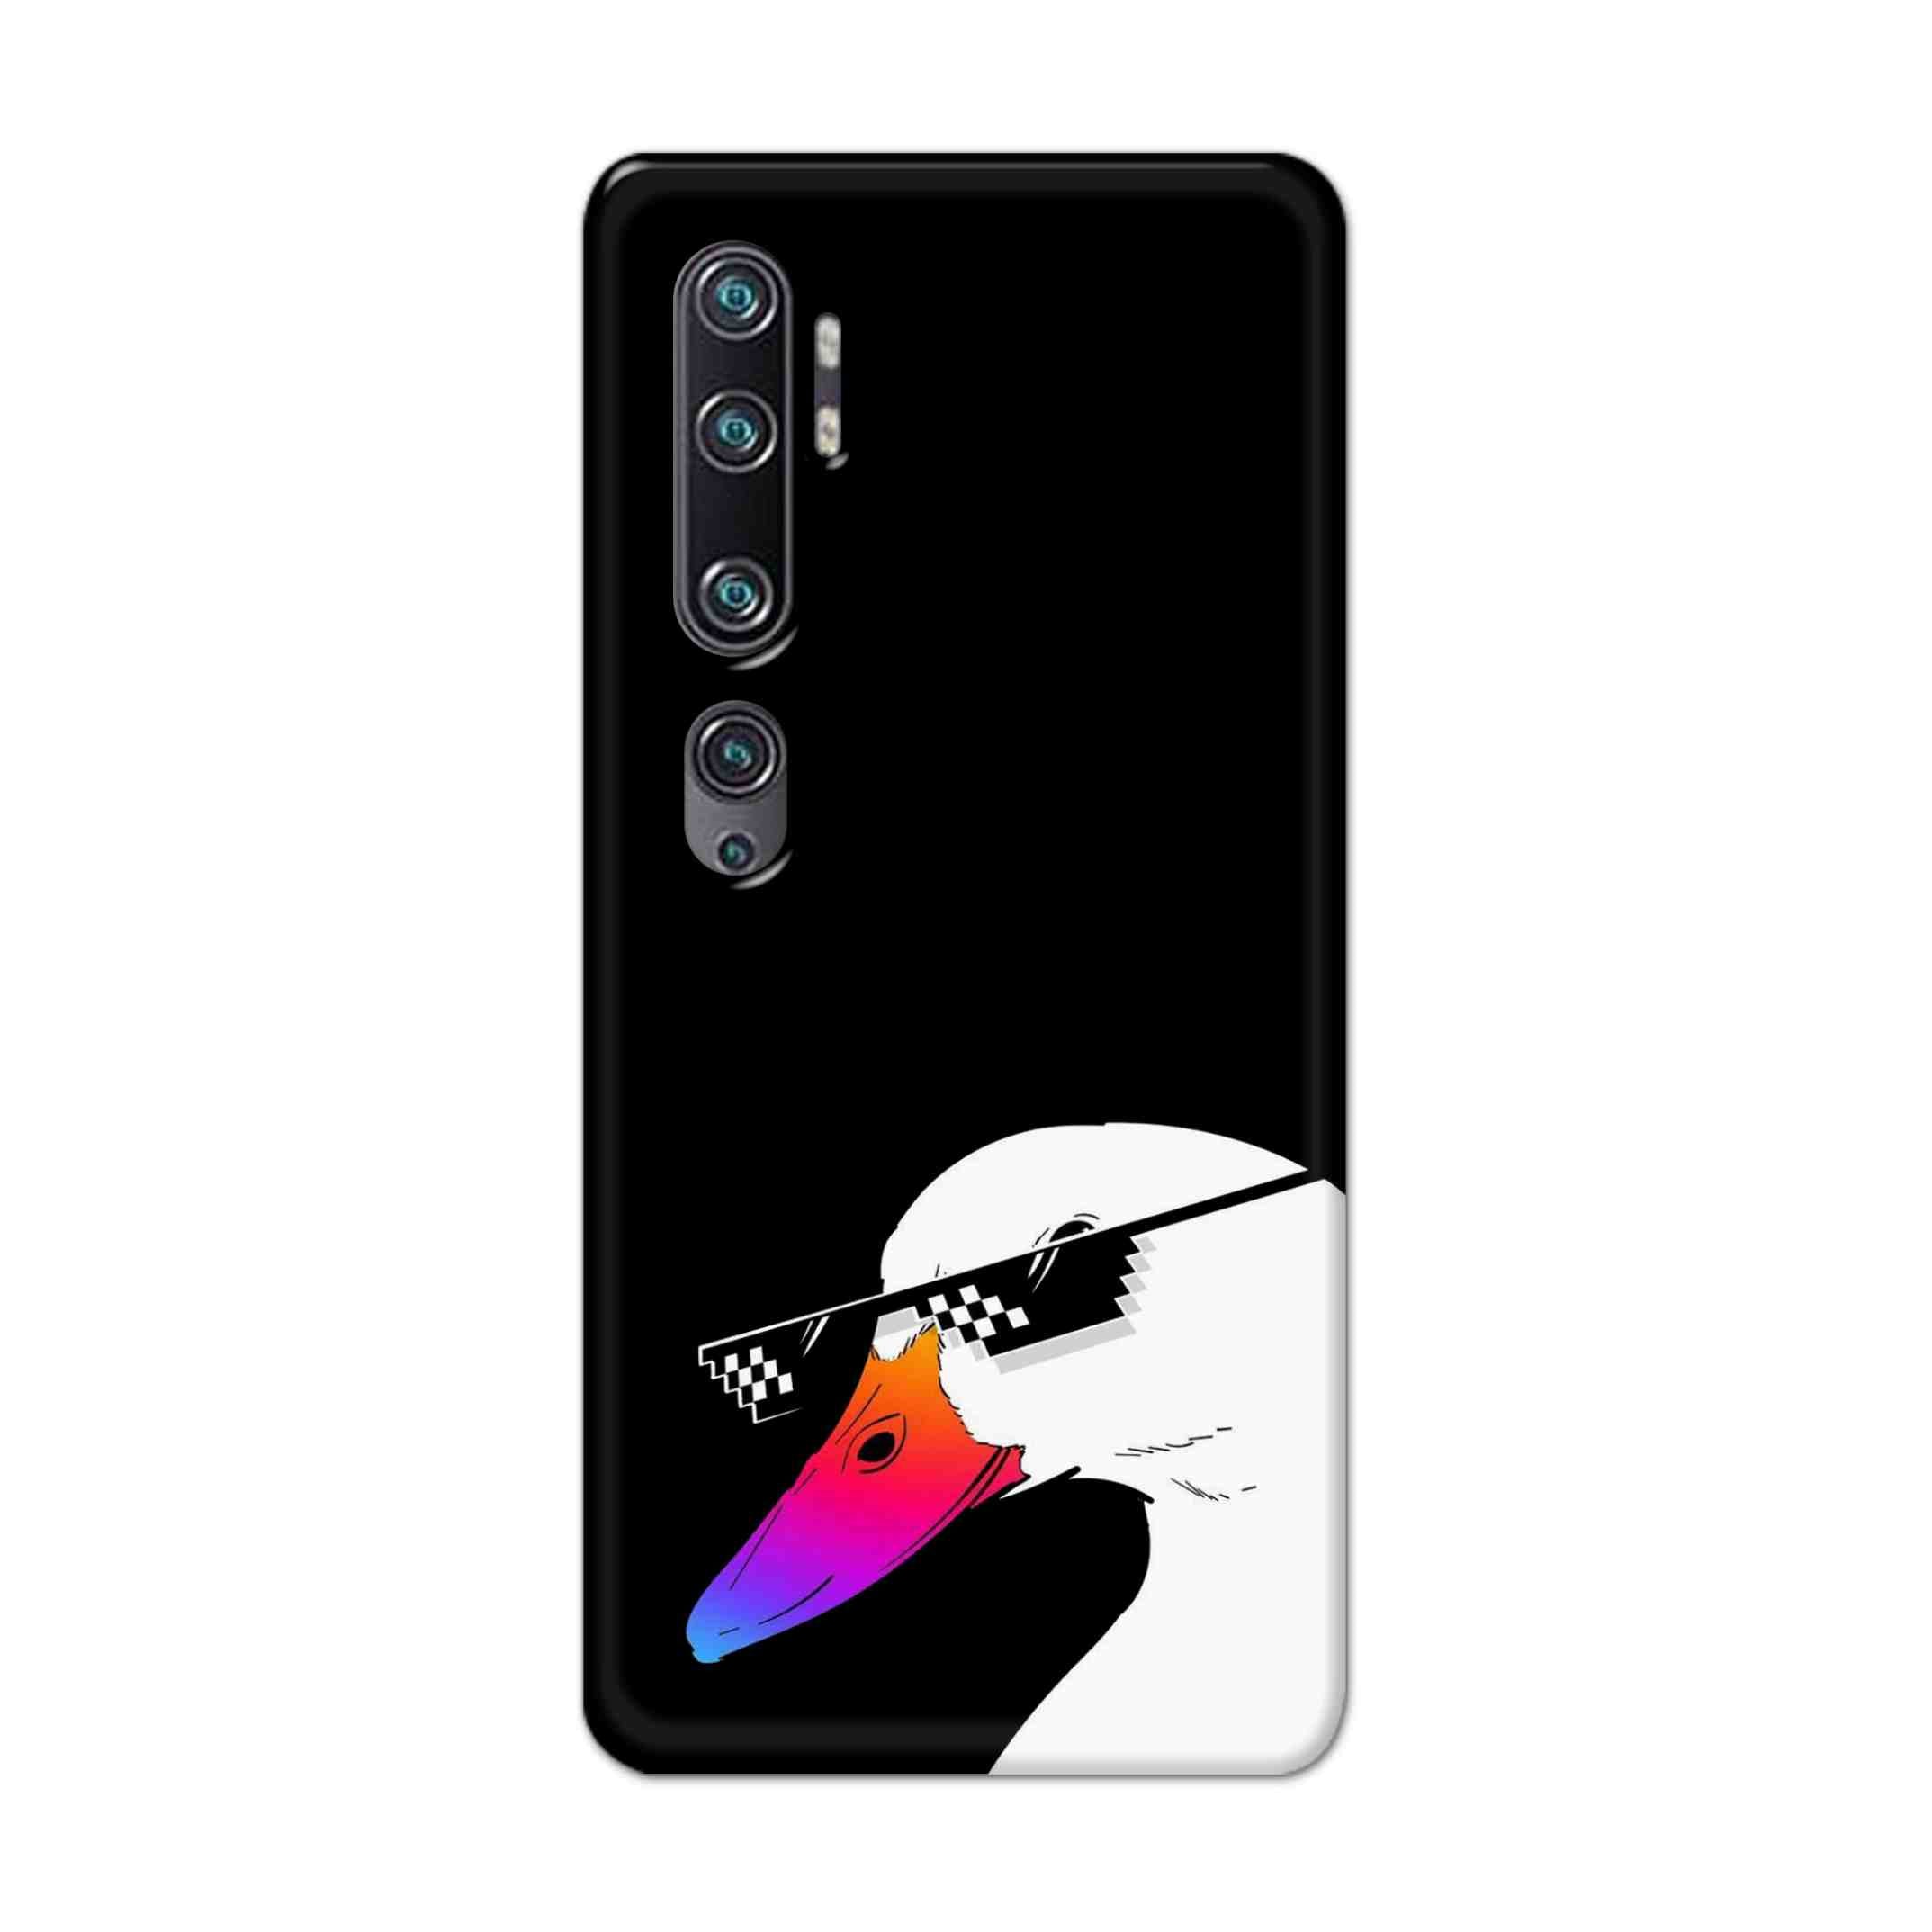 Buy Neon Duck Hard Back Mobile Phone Case Cover For Xiaomi Mi Note 10 Pro Online